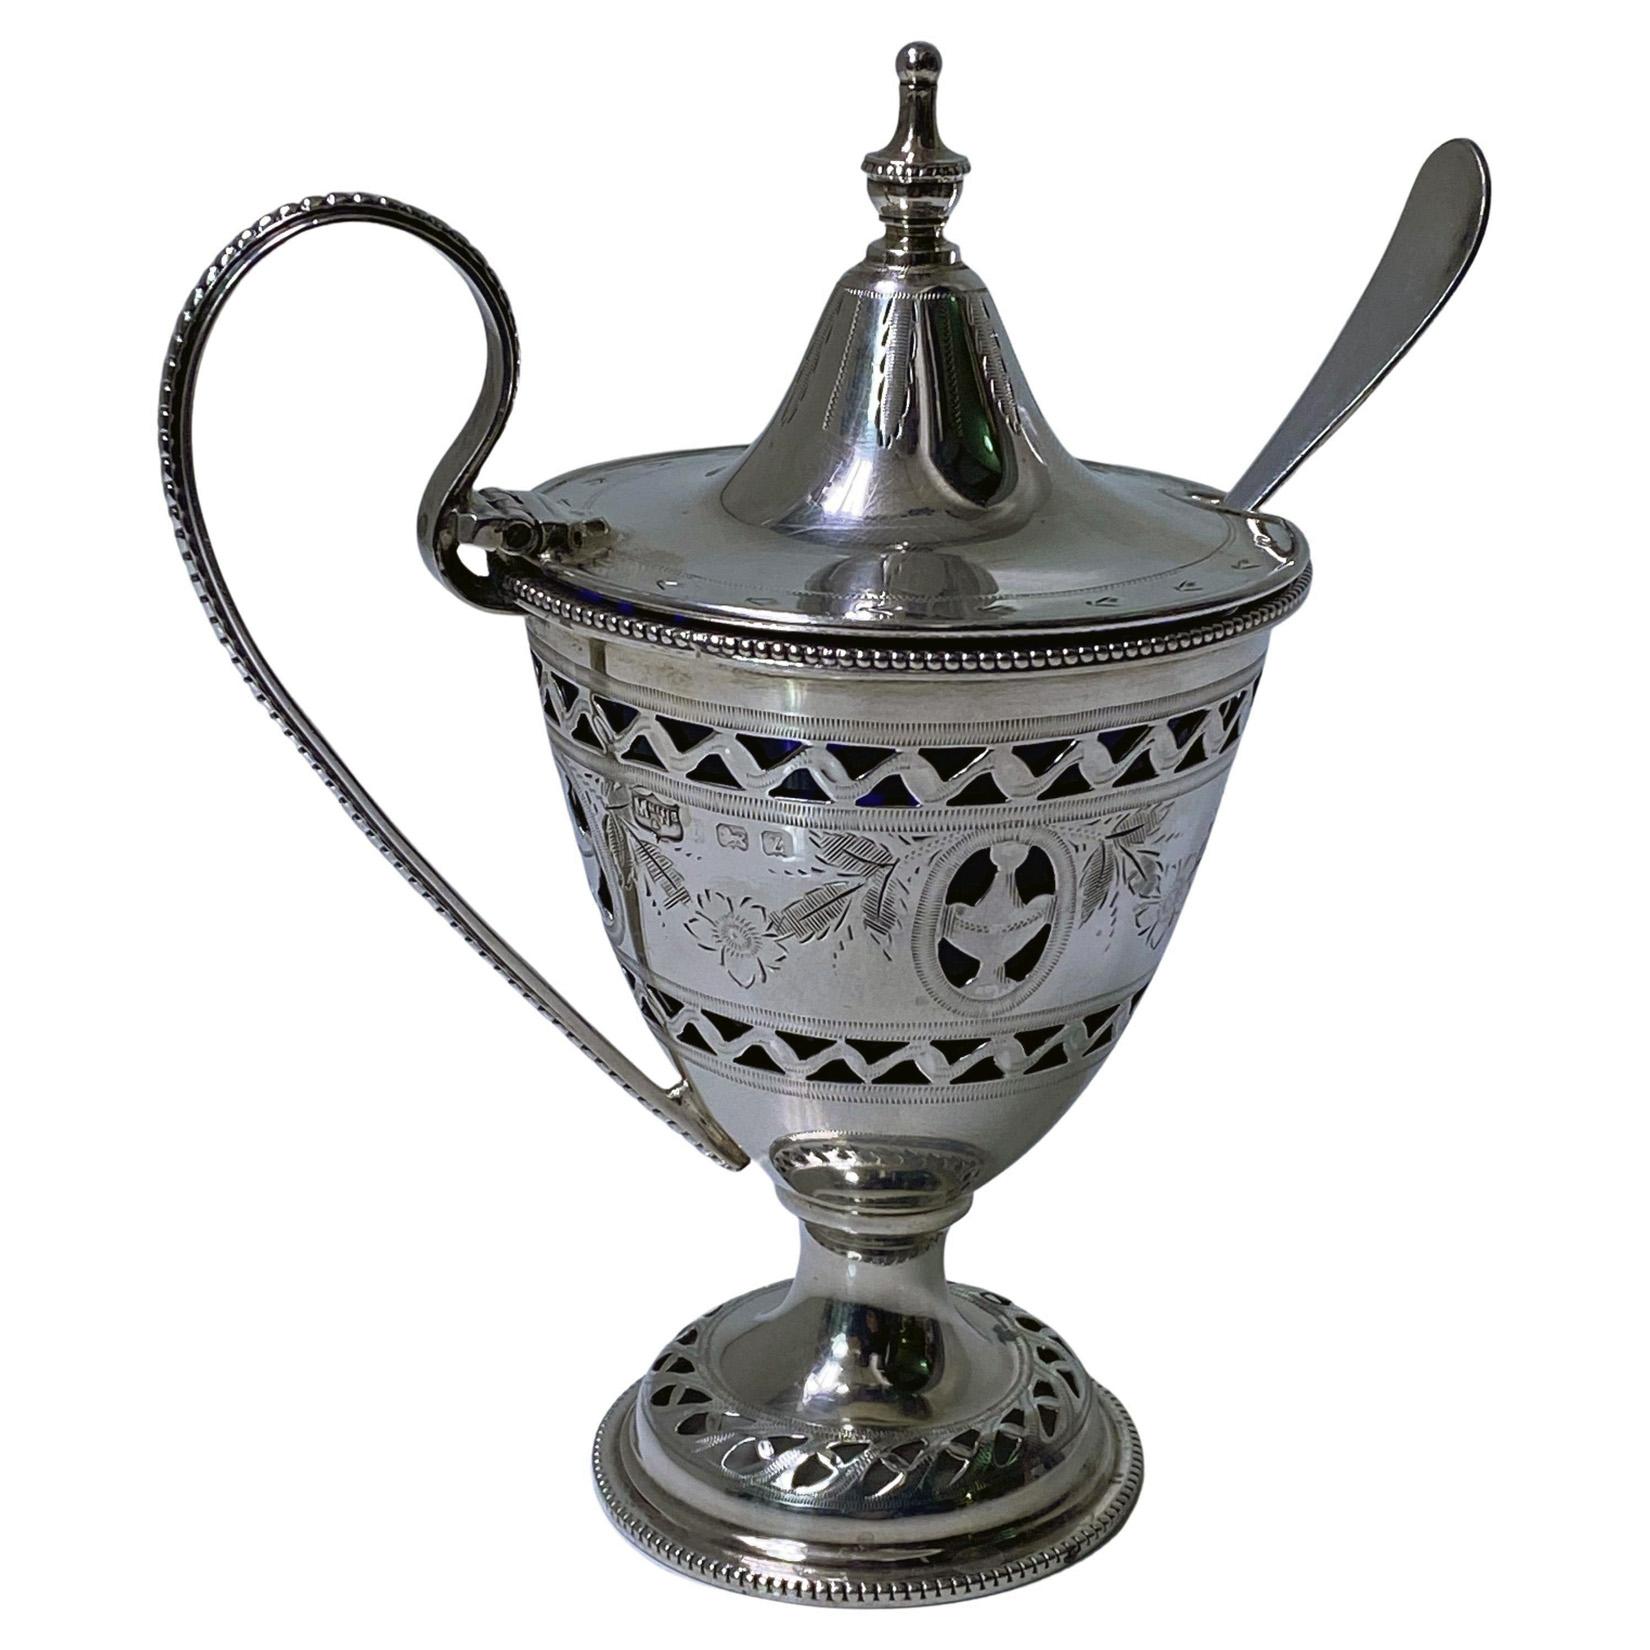 English silver mustard pot London 1924 Mappin and Webb. The mustard of 18th century Georgian neoclassical form, vase shape with pierced work and garland foliate design, bead borders and handle, domed cover with urn shape finial. Fully hallmarked to